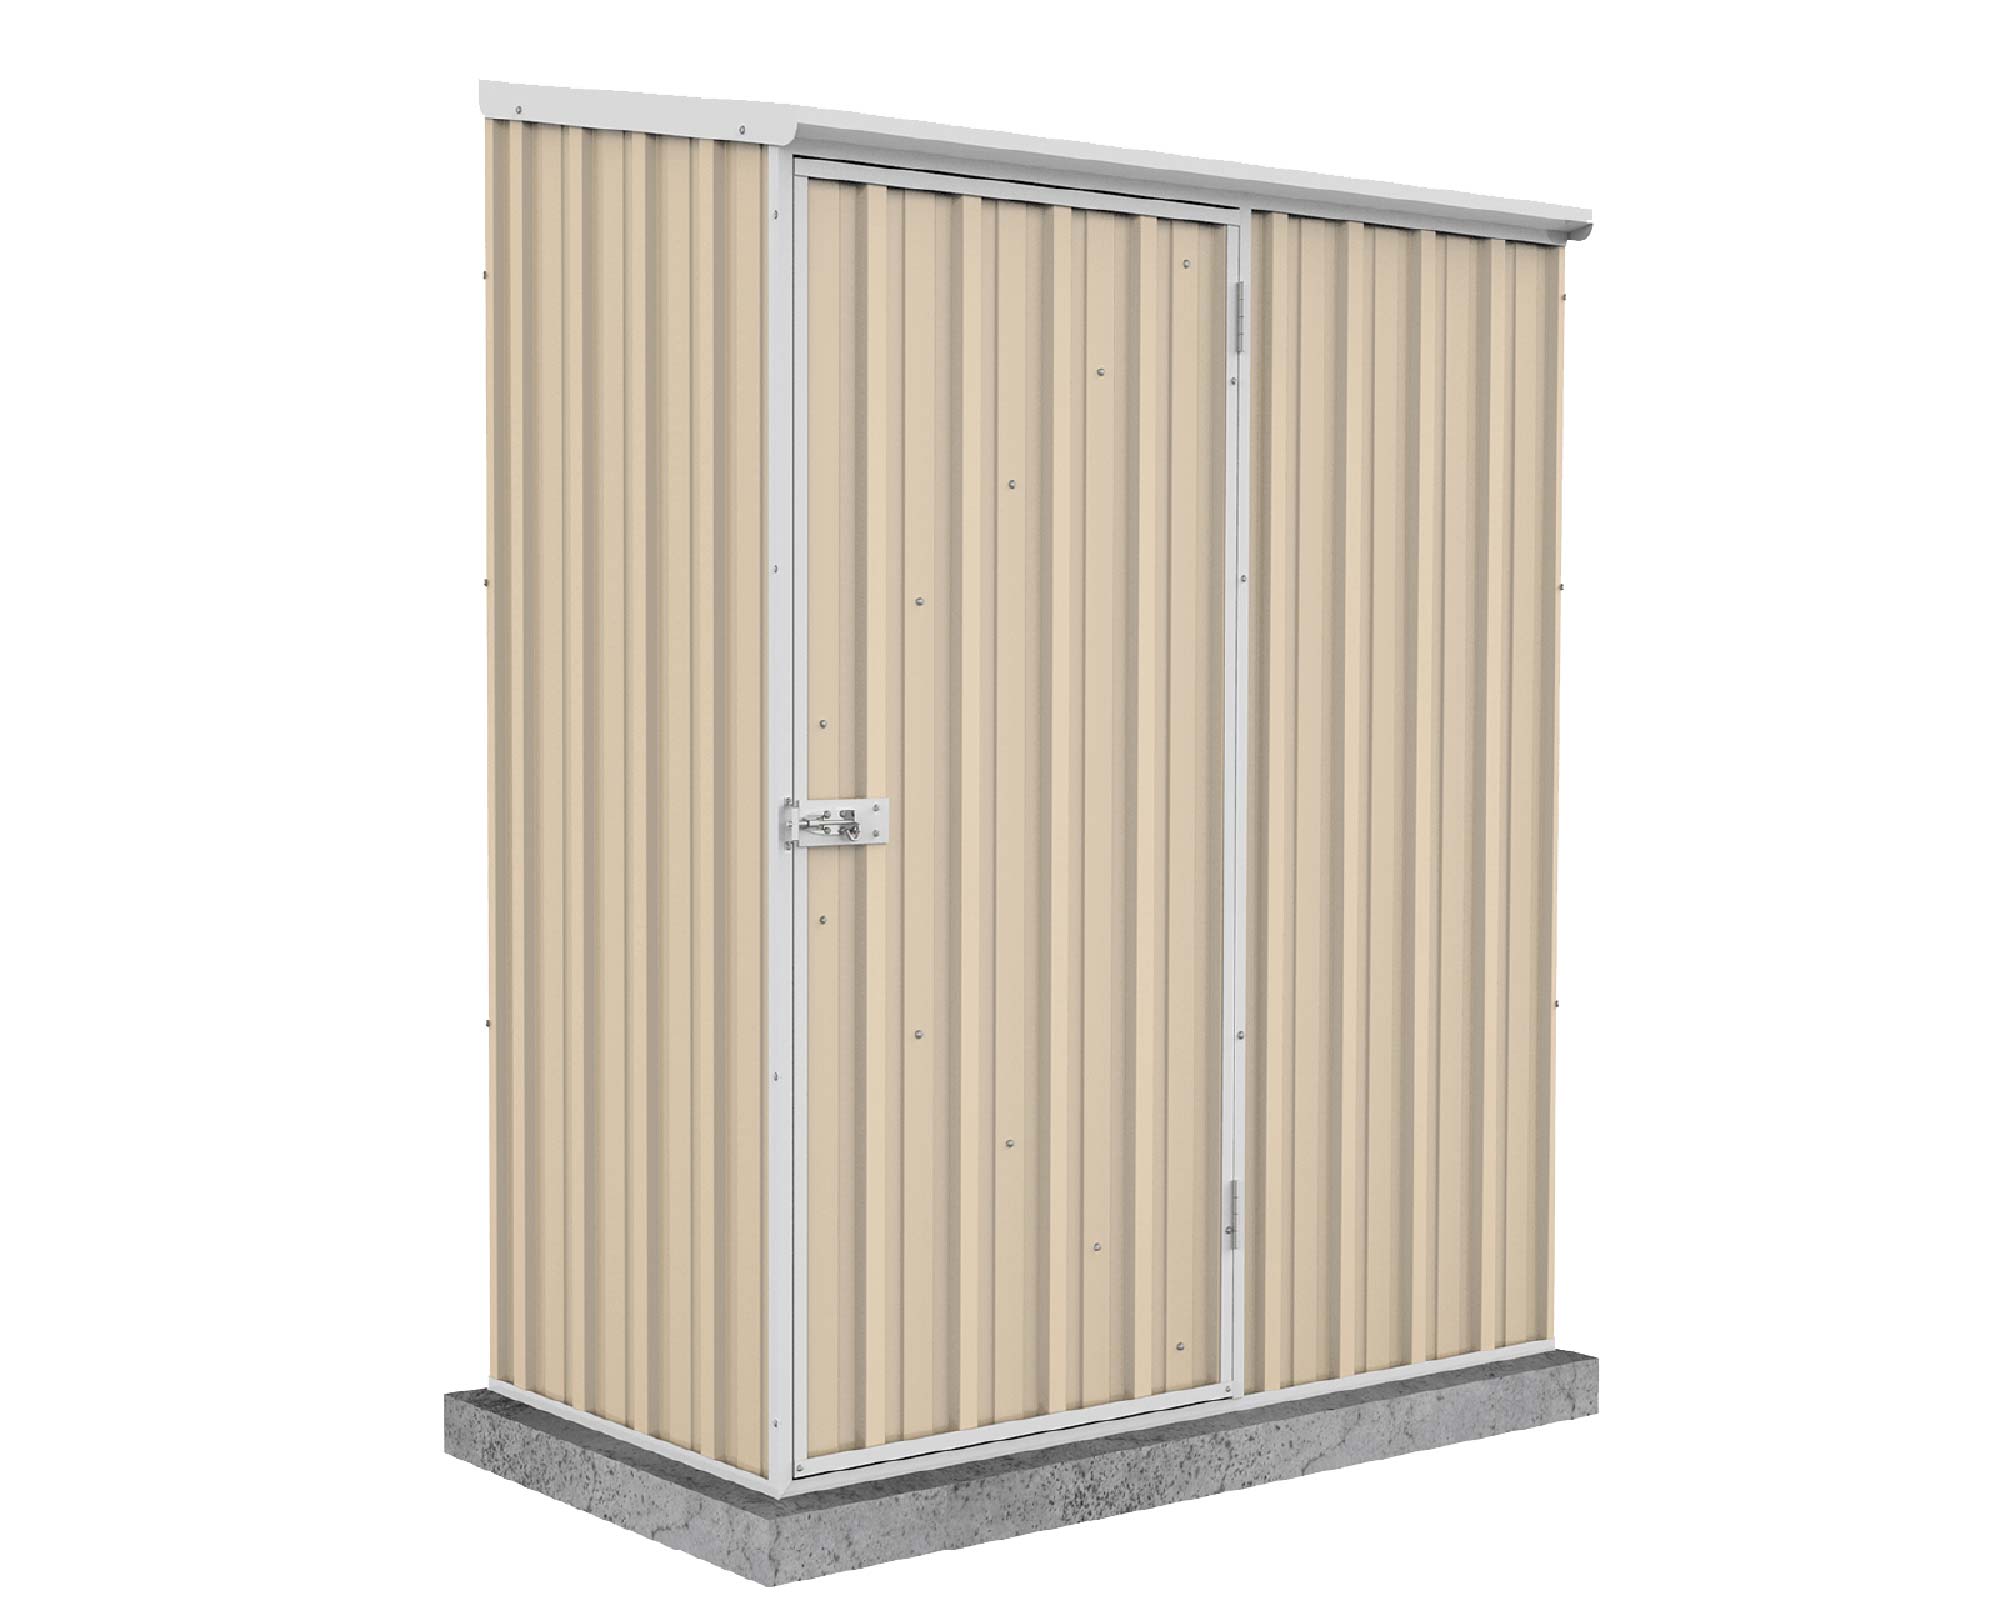 ABSCO Single Door Shed 152cm wide x 78cm deep and 195cm tall in Cream